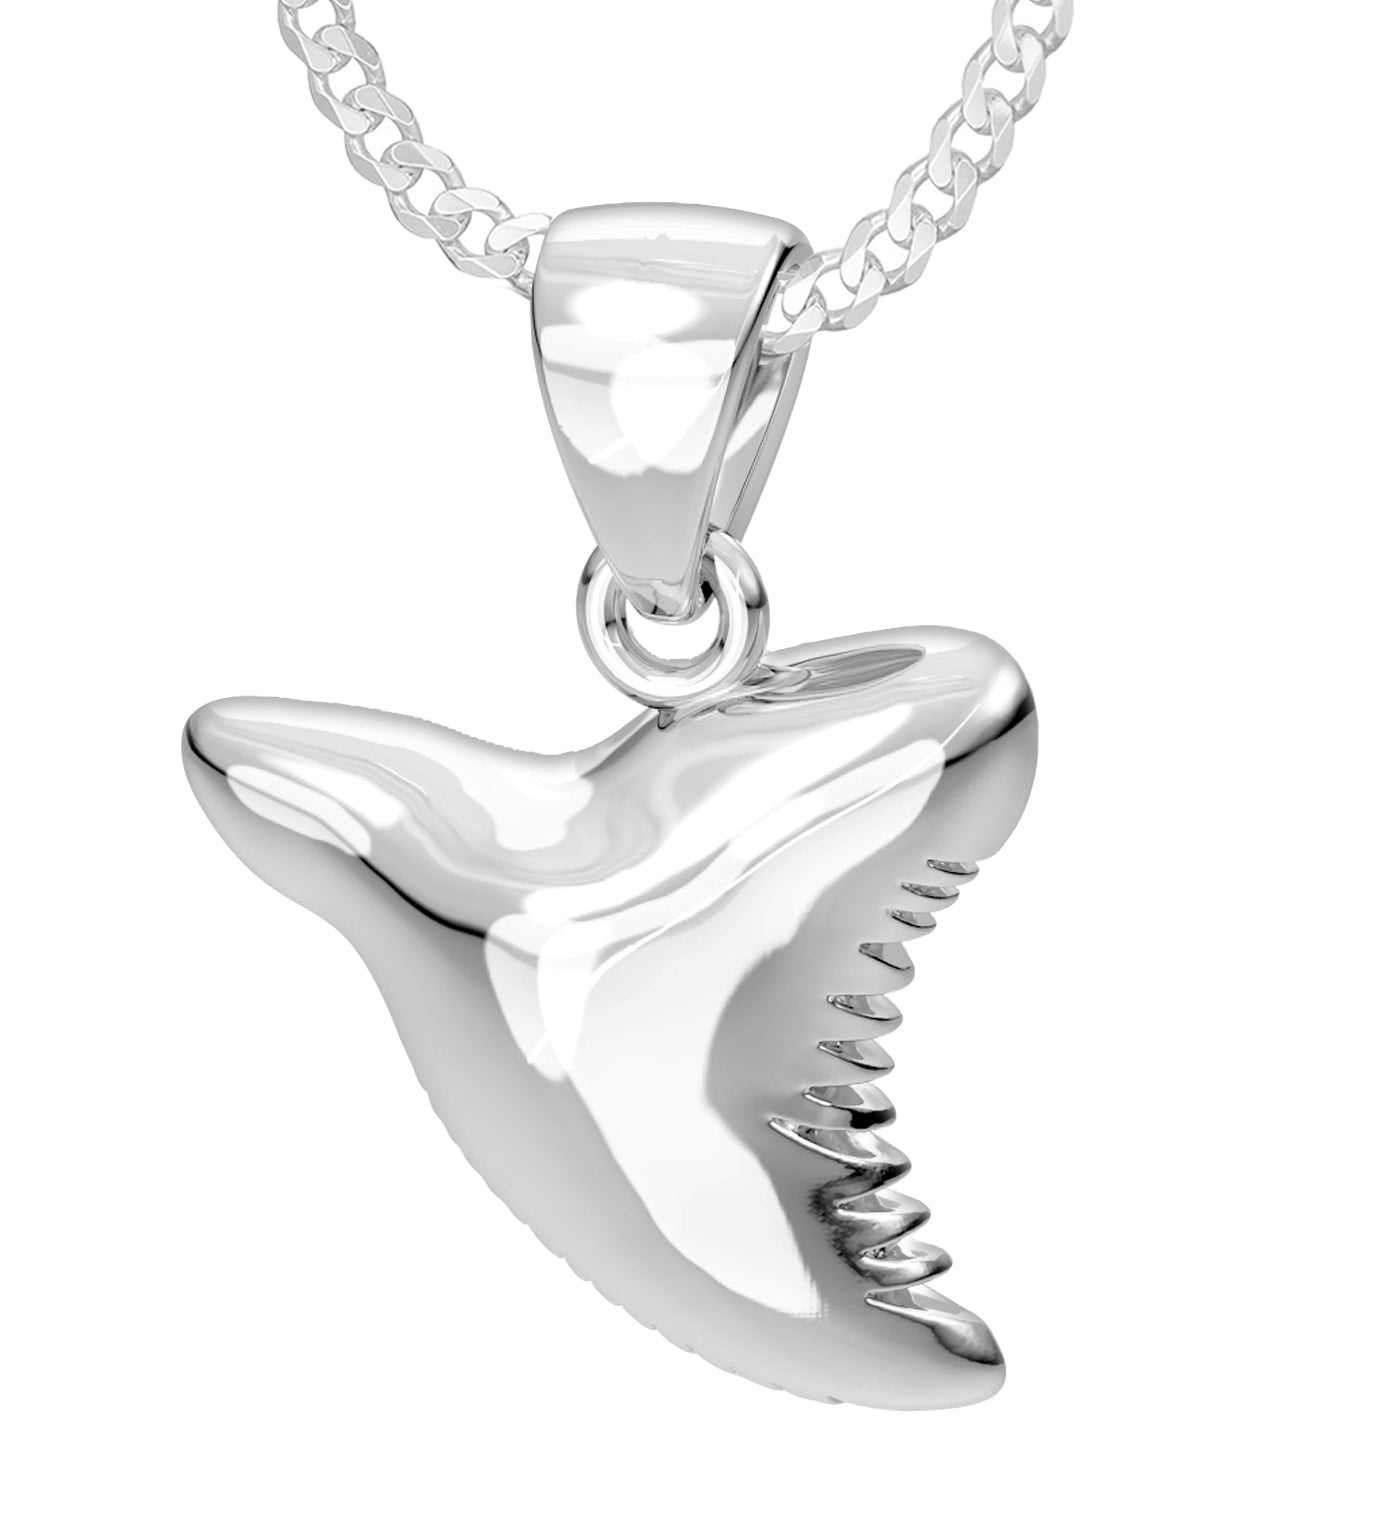 Shark tooth necklace by Shelton Metal | Finematter